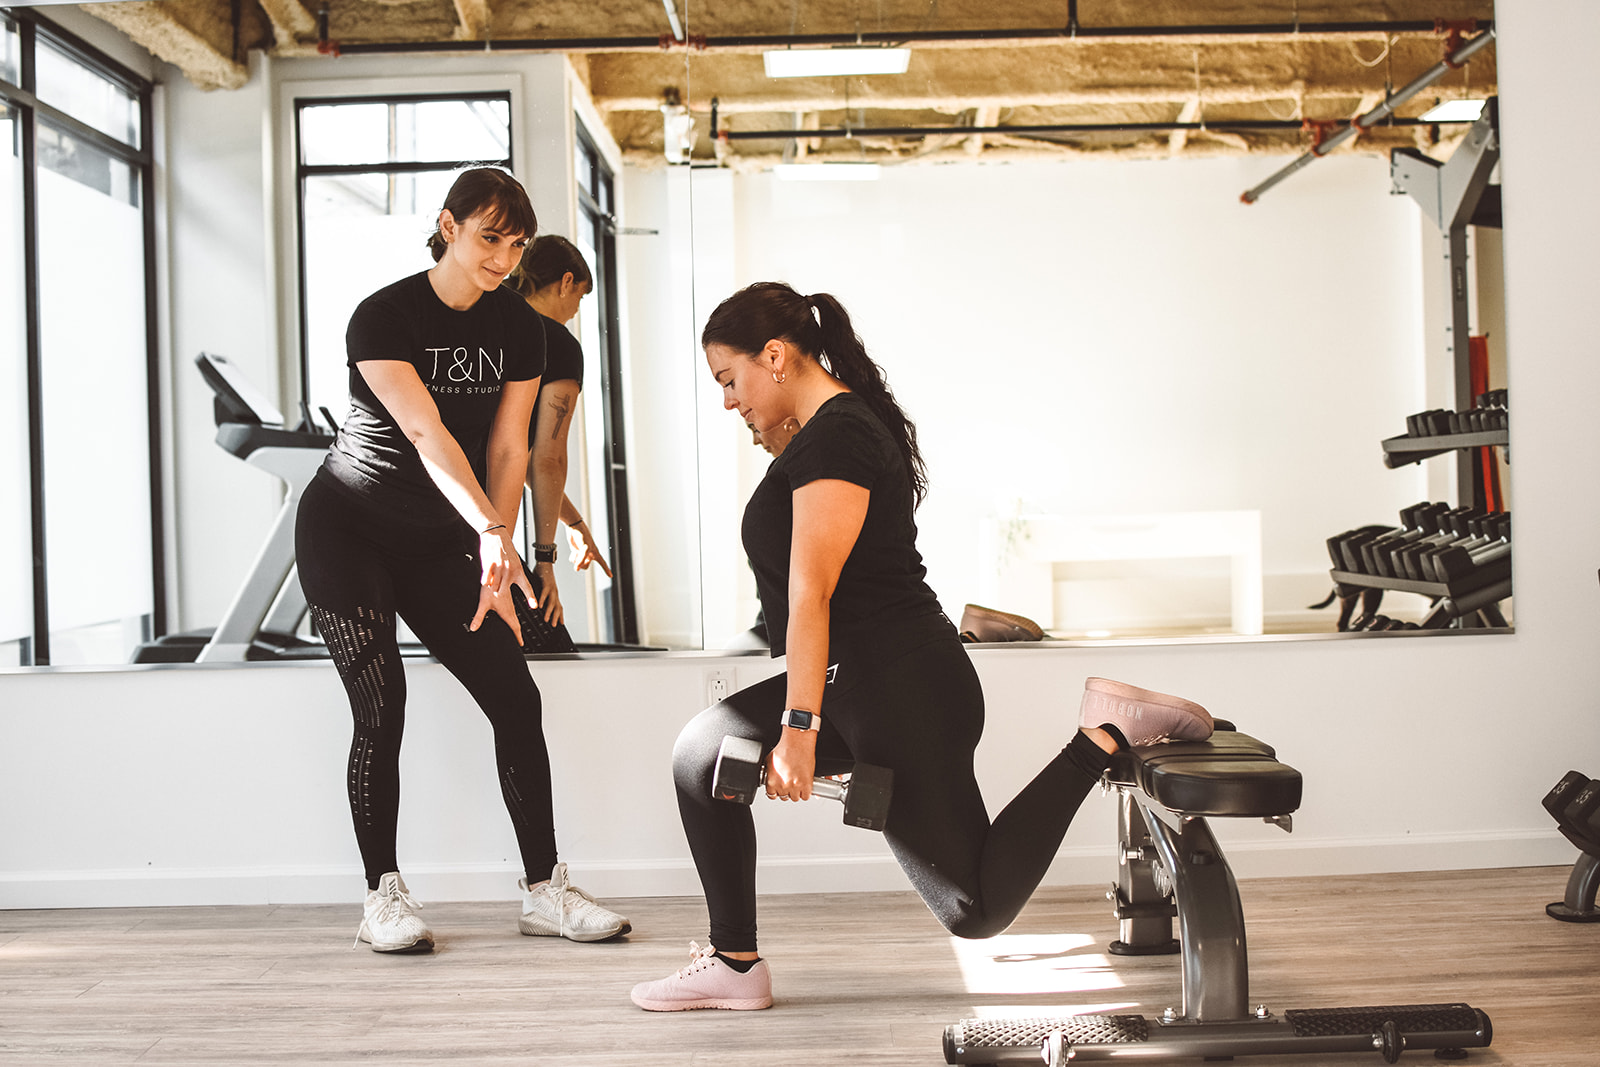 Two women engaging in weight training at the gym.